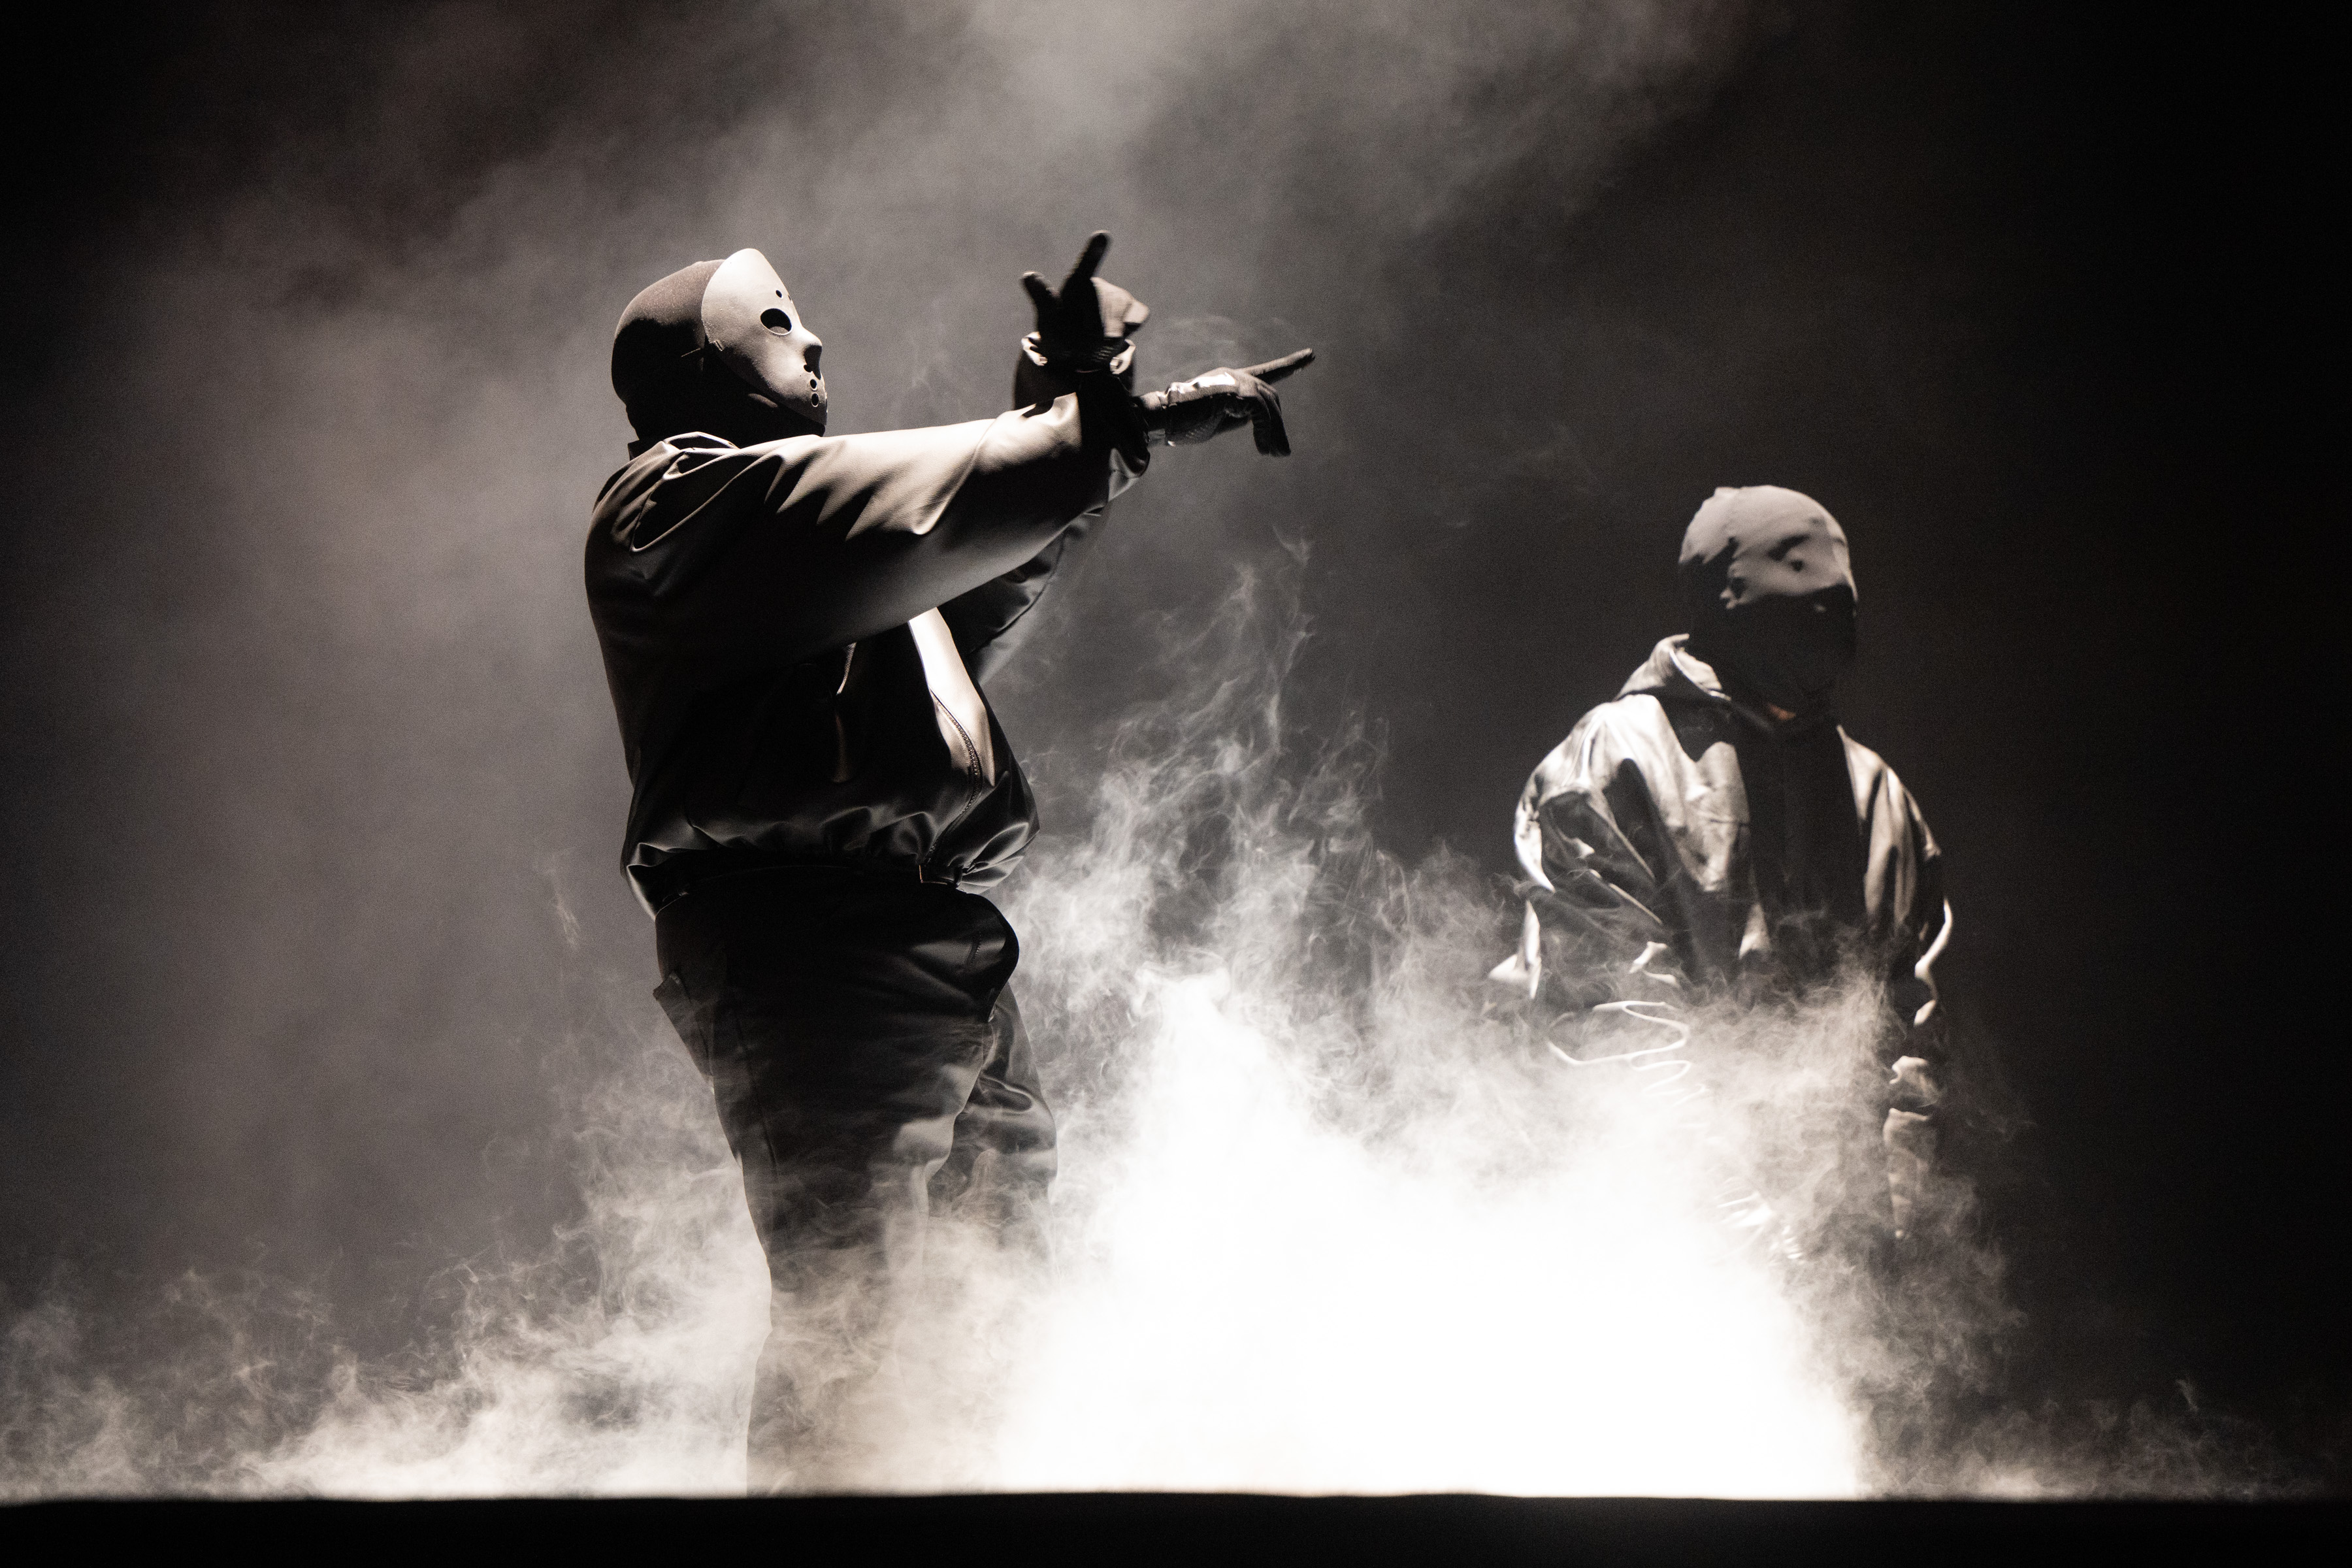 Back in March, Kanye took another jab at Drake on social media